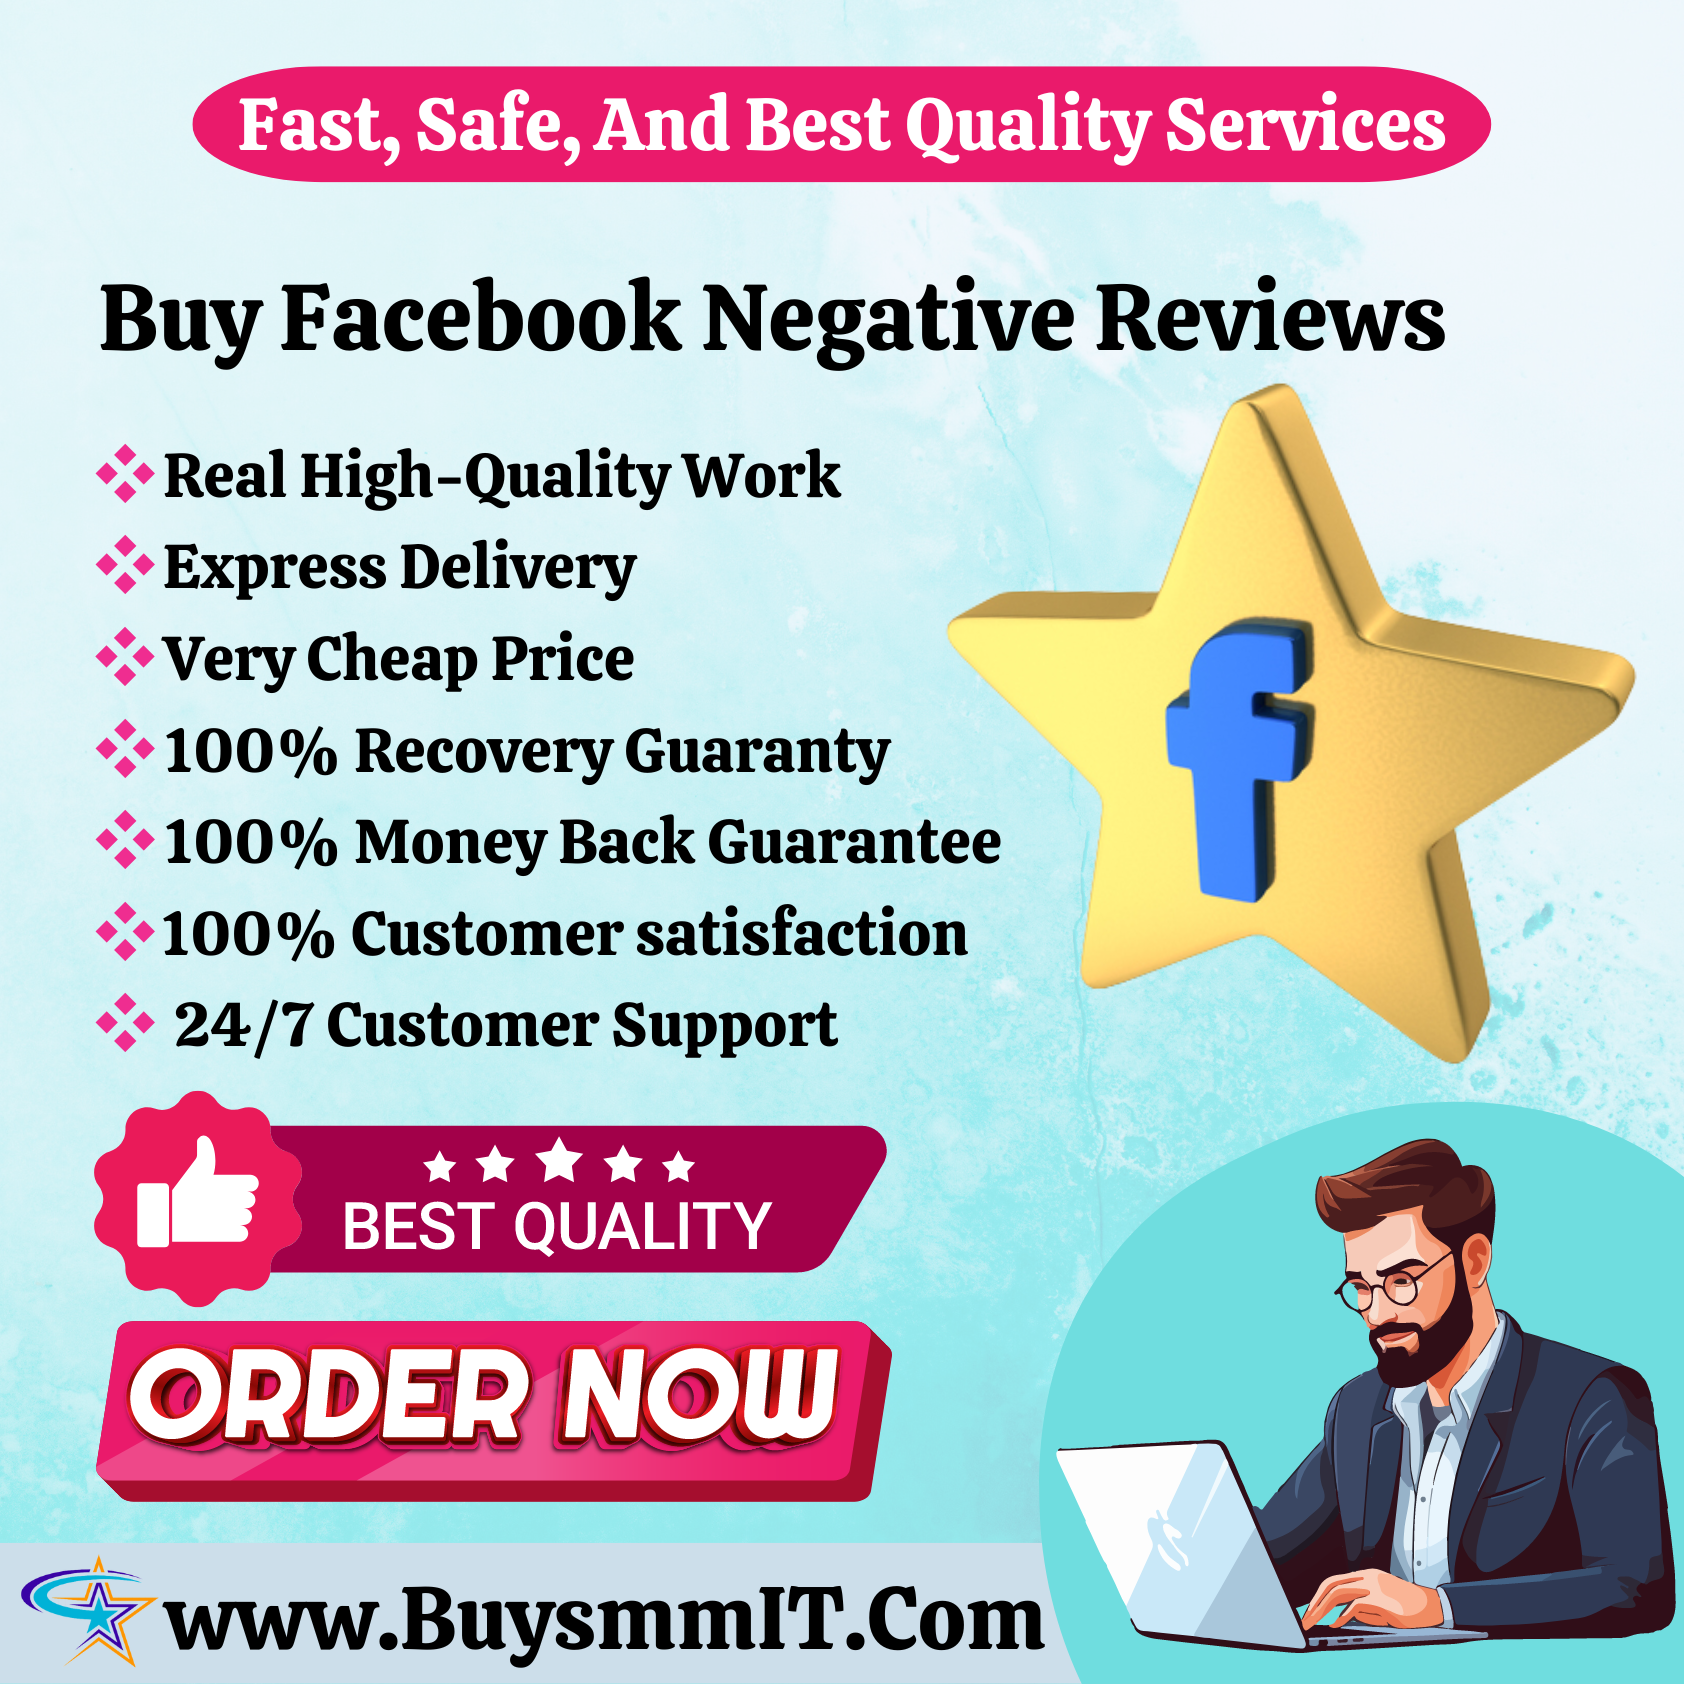 Buy Facebook Negative Reviews - High Quality Service